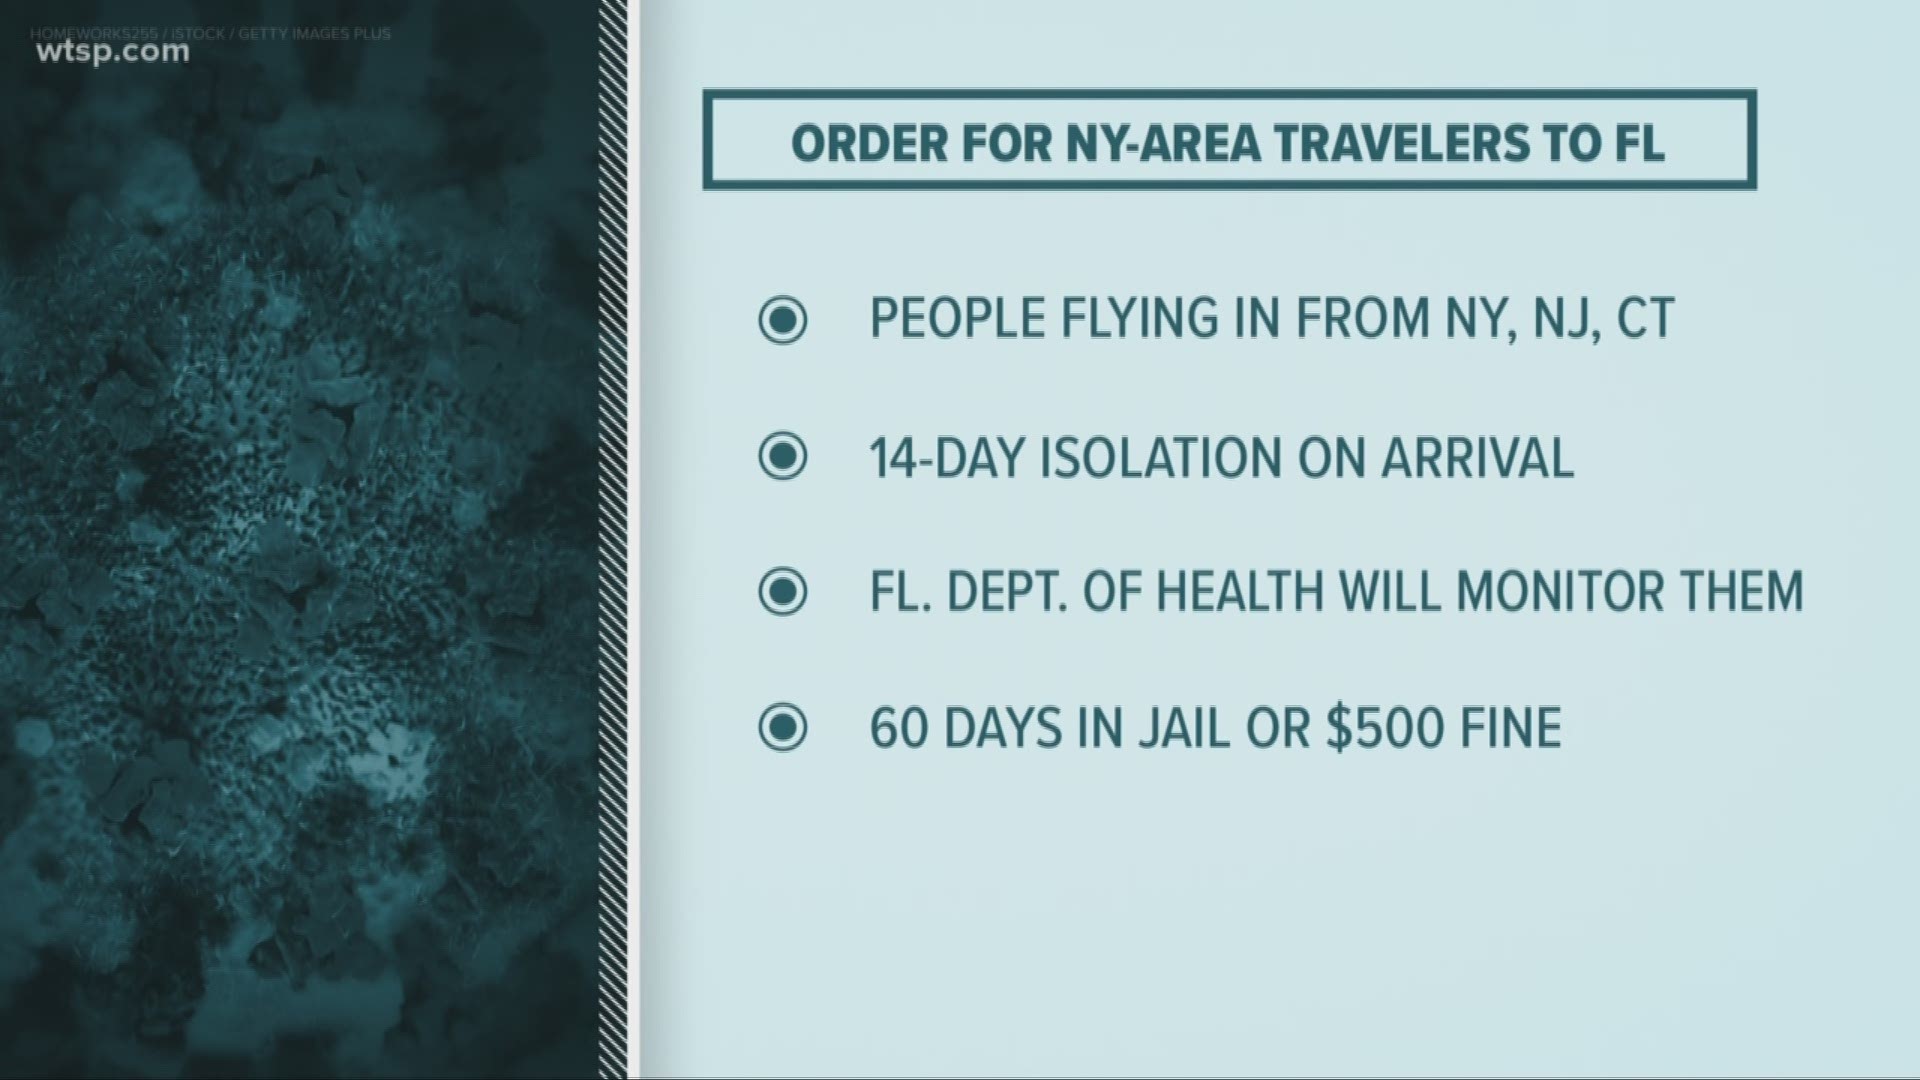 People on domestic flights flying in from the New York City region are being told to self-isolate for 14 days.